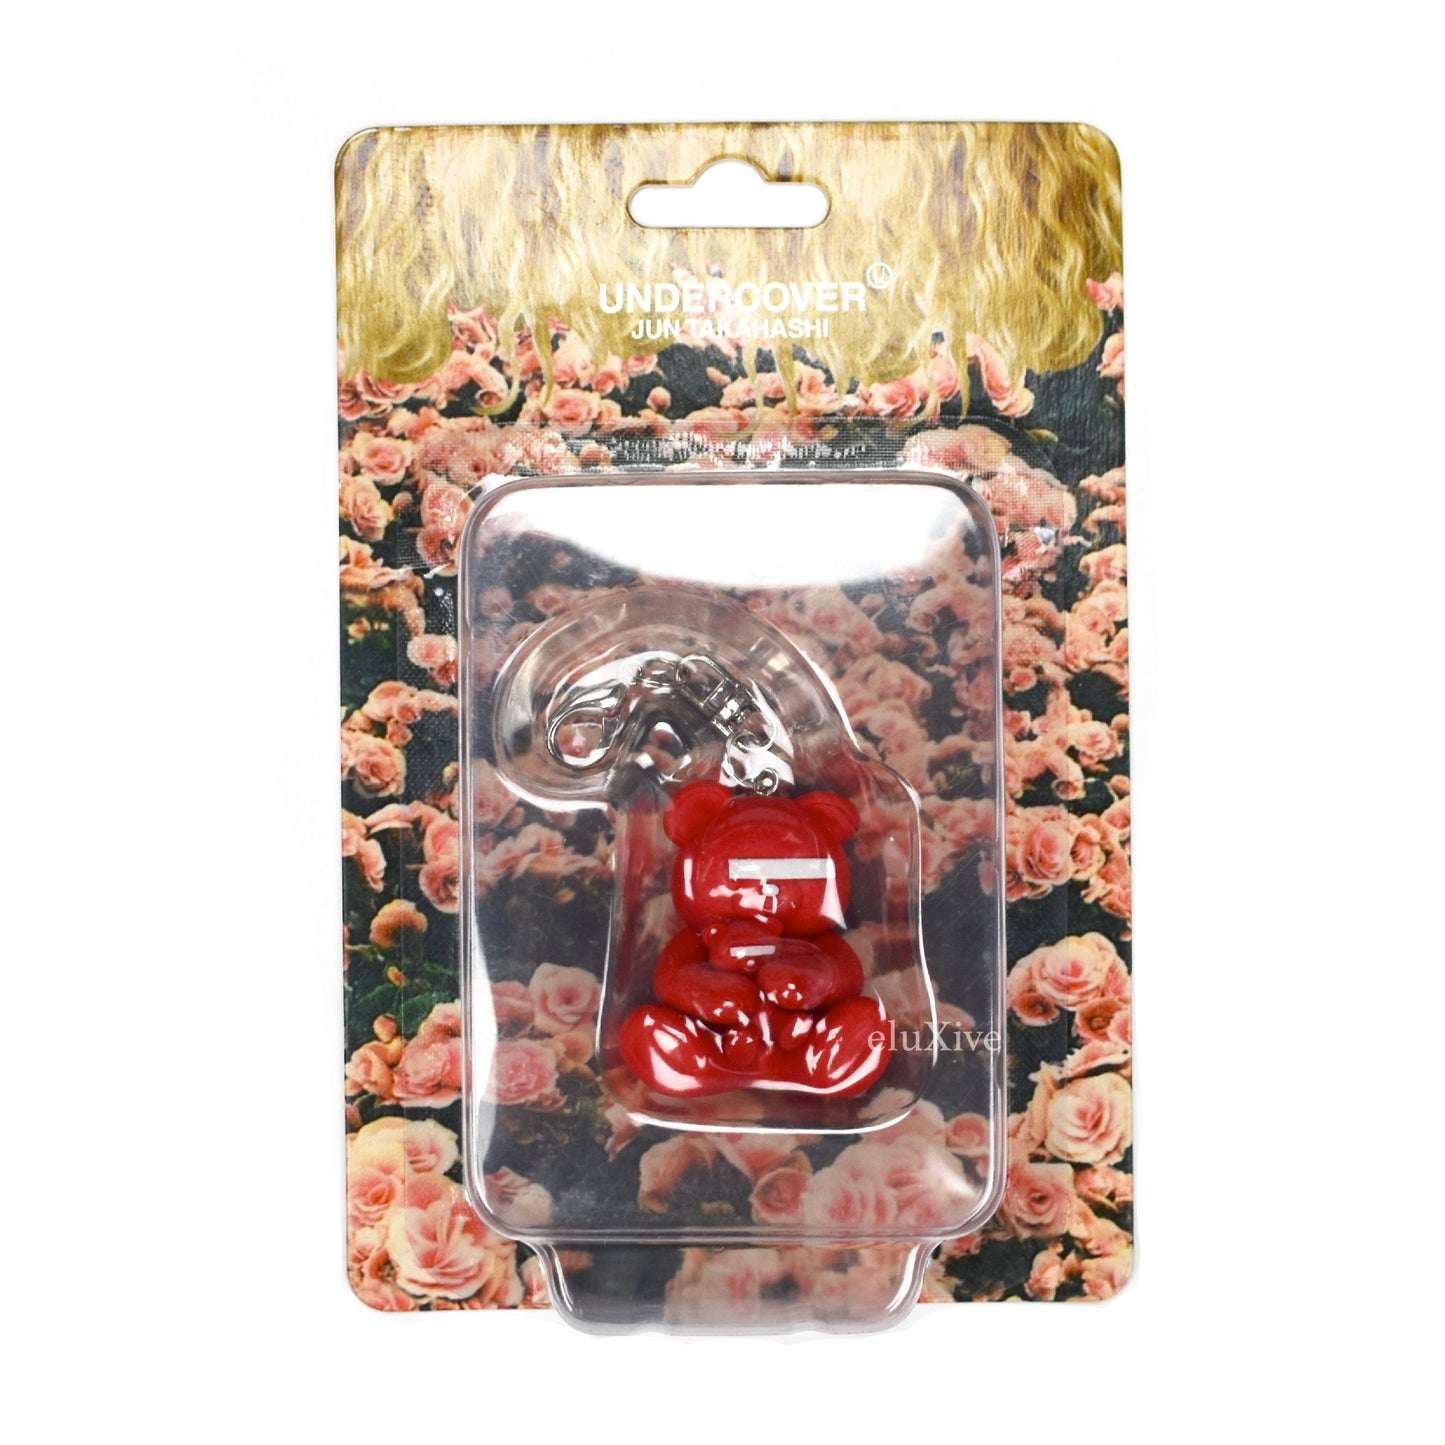 Undercover x Medicom - Hypefest Exclusive Bear Keychain (Red)